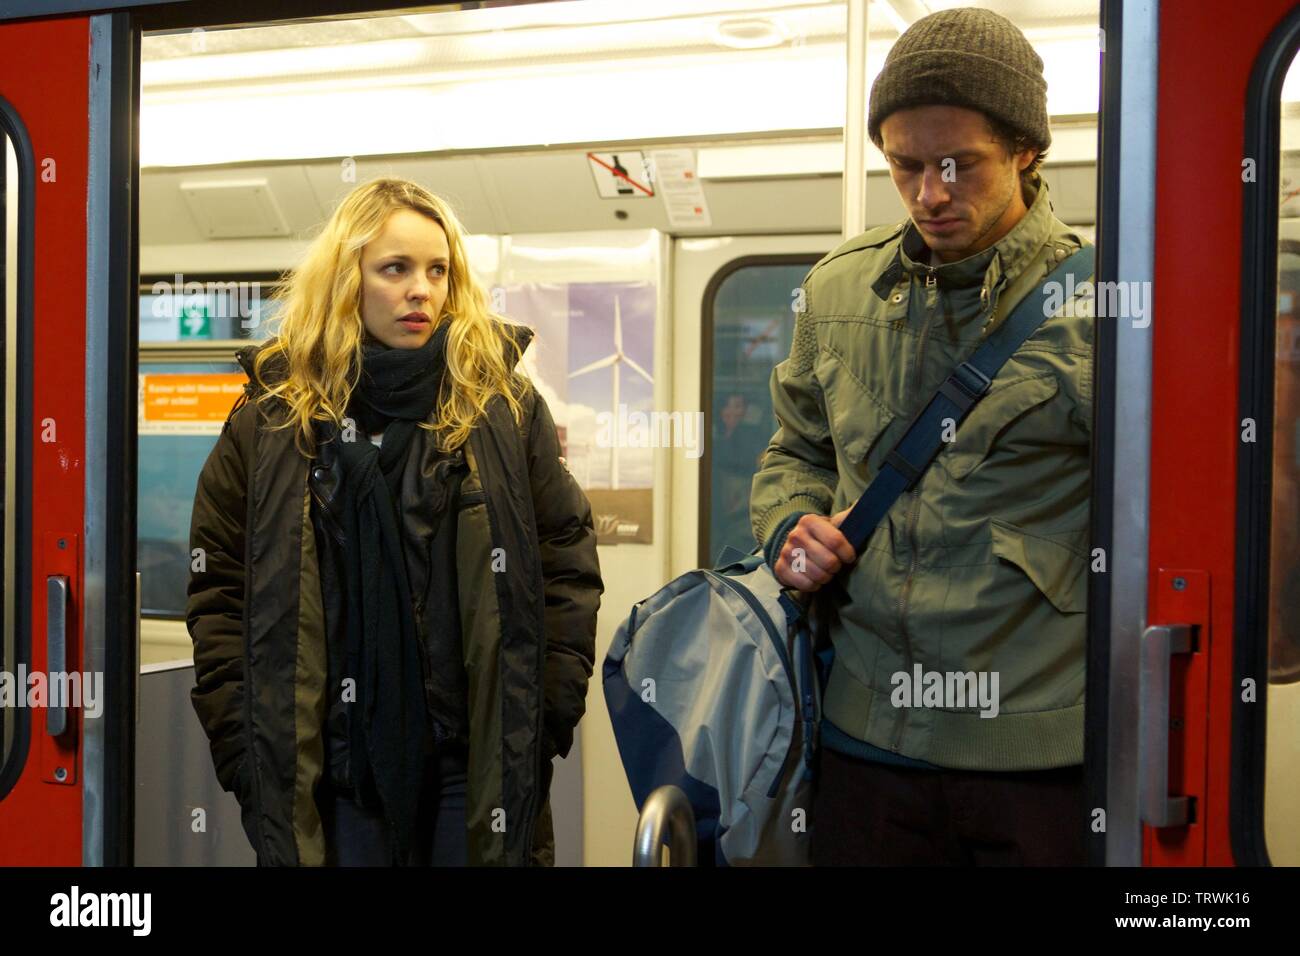 RACHEL MCADAMS and GRIGORI DOBRYGIN in A MOST WANTED MAN (2014). Copyright: Editorial use only. No merchandising or book covers. This is a publicly distributed handout. Access rights only, no license of copyright provided. Only to be reproduced in conjunction with promotion of this film. Credit: DEMAREST FILMS / Album Stock Photo